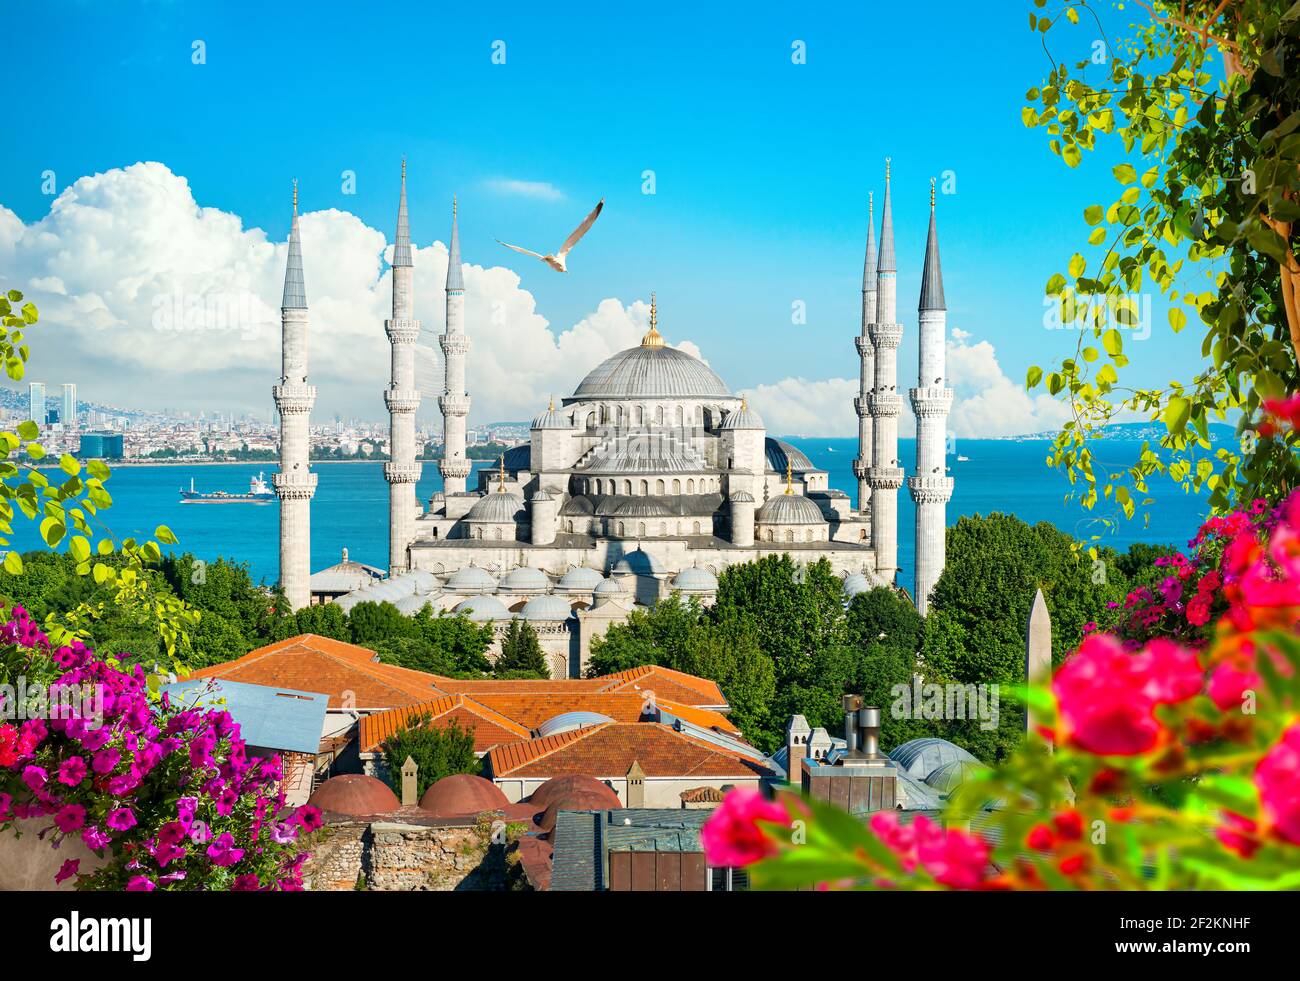 Seagulls over Blue Mosque and Bosphorus in Istanbul, Turkey Stock Photo